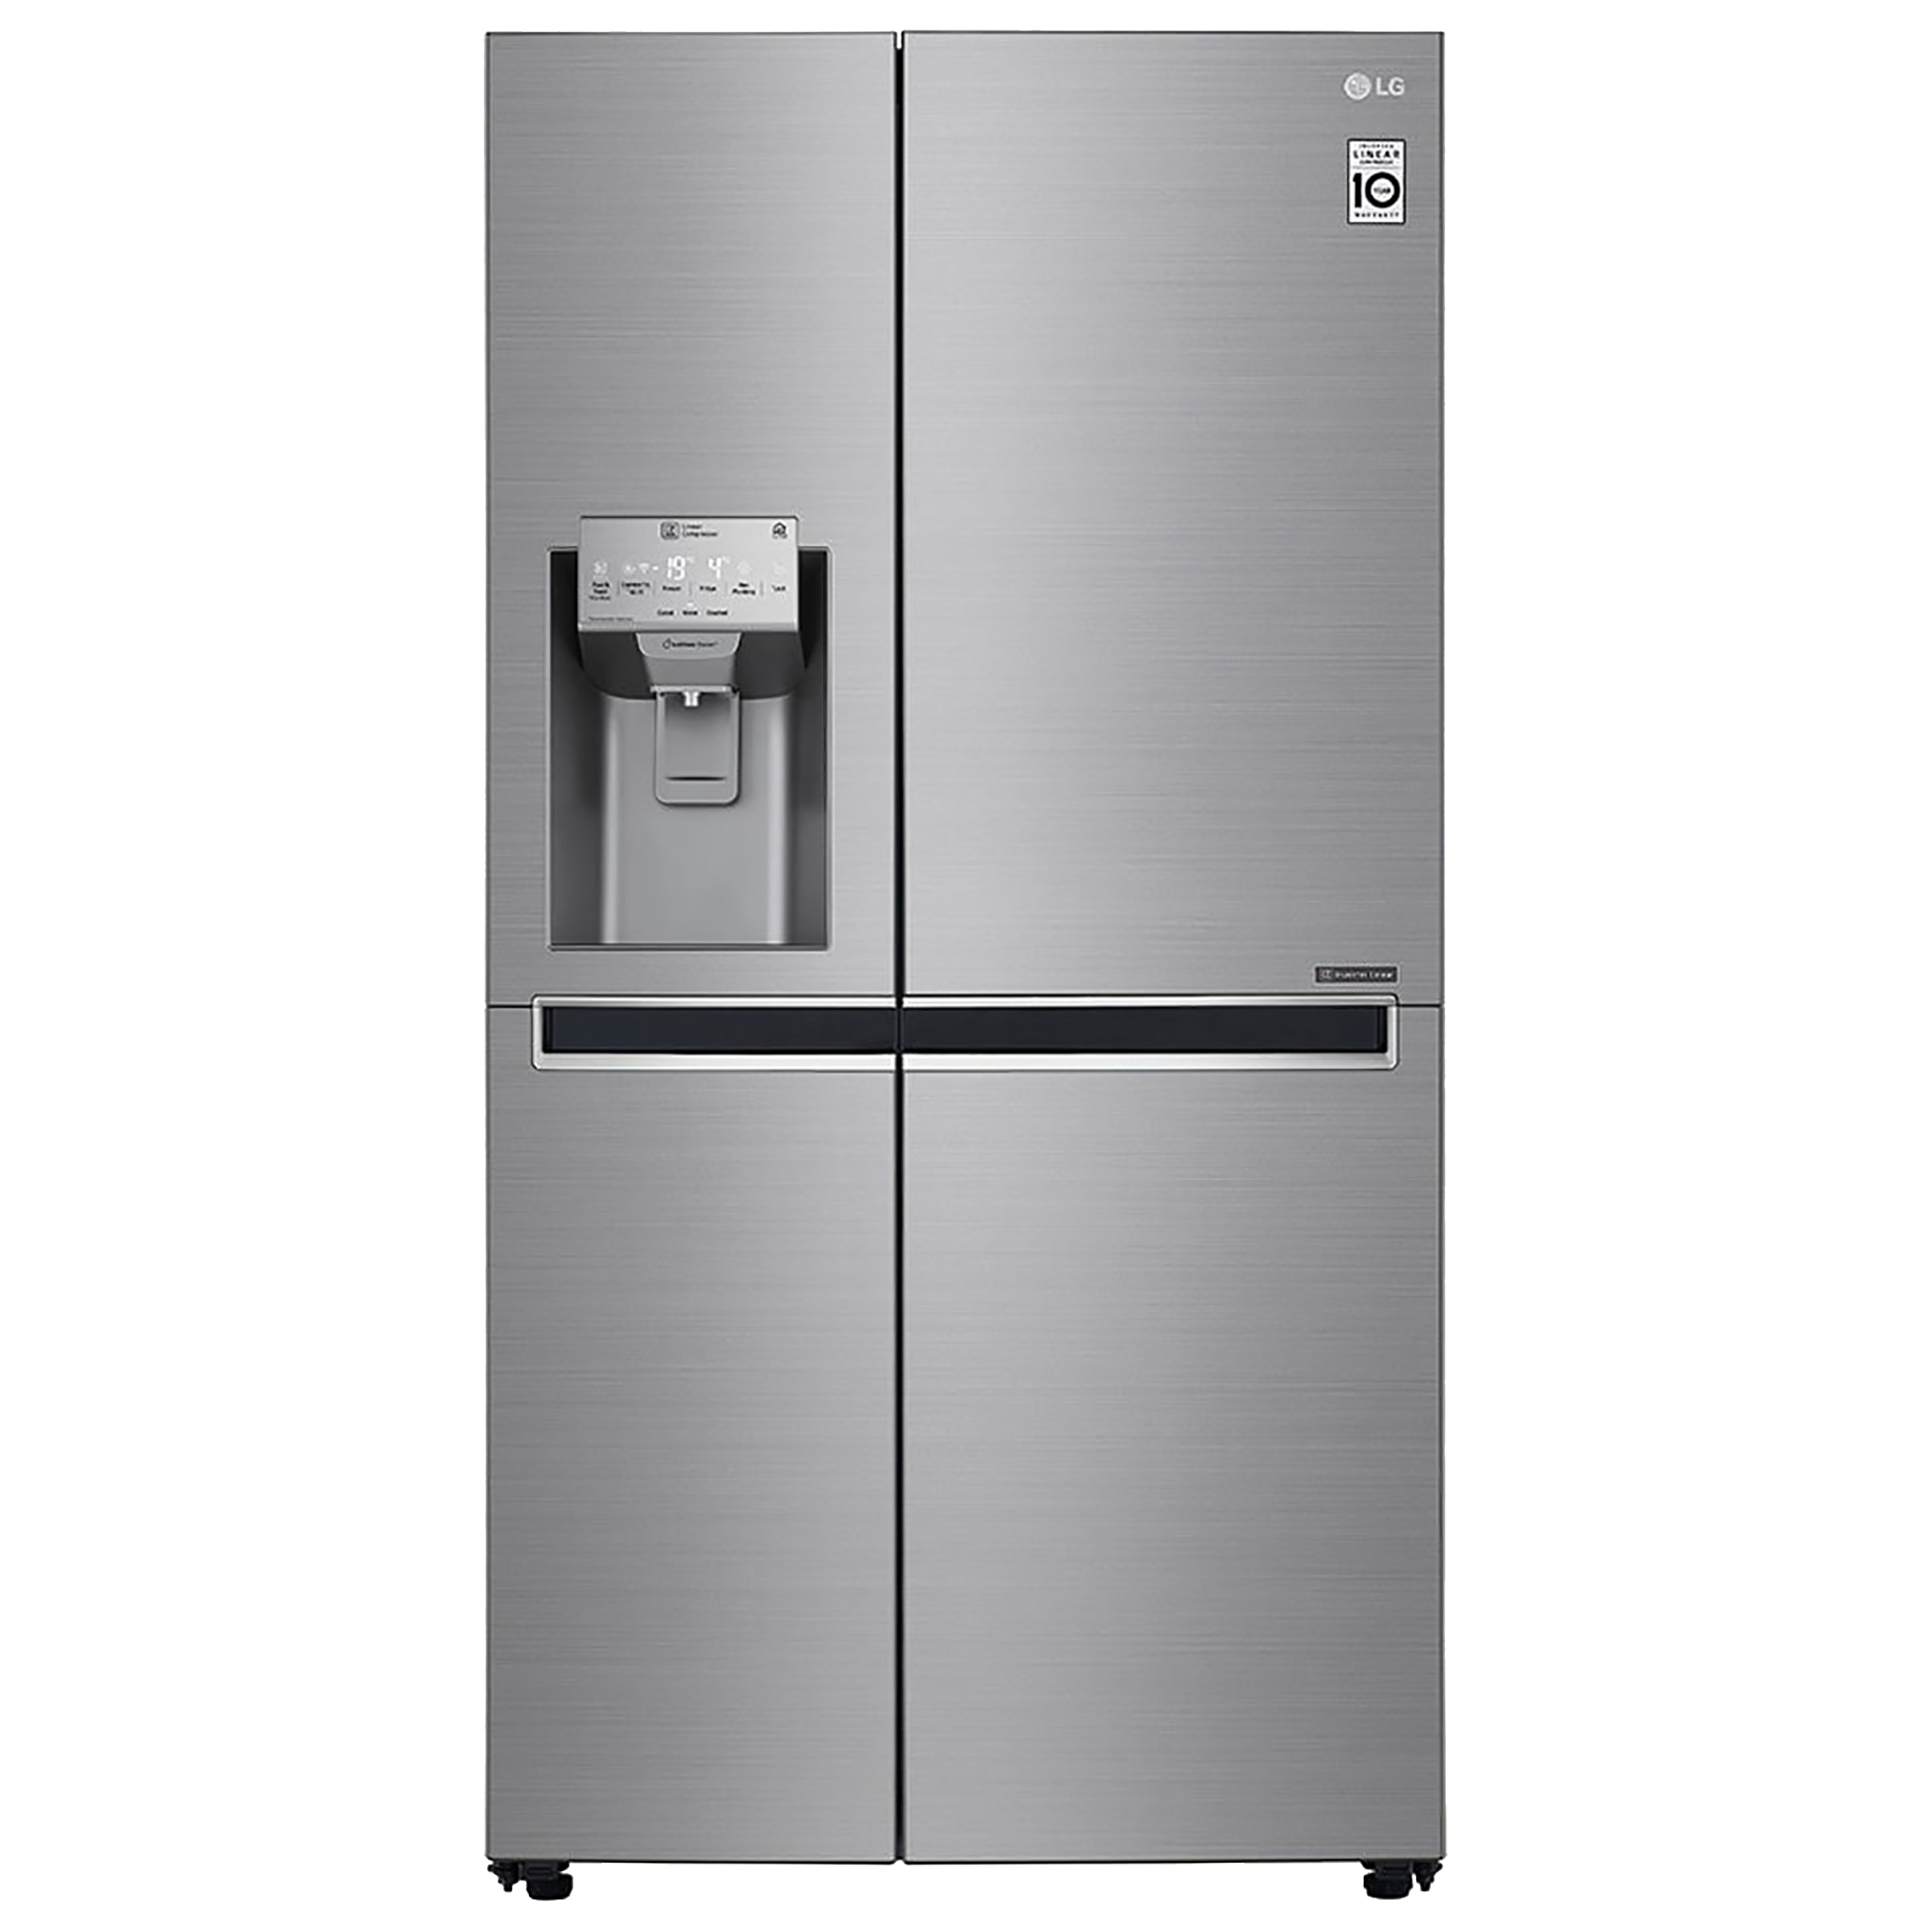 LG - lg 668 Litres Frost Free Inverter Side-by-Side Door Refrigerator (Multi Air Flow, GC-L247CLAV.BPZQEB, Shiny Steel)